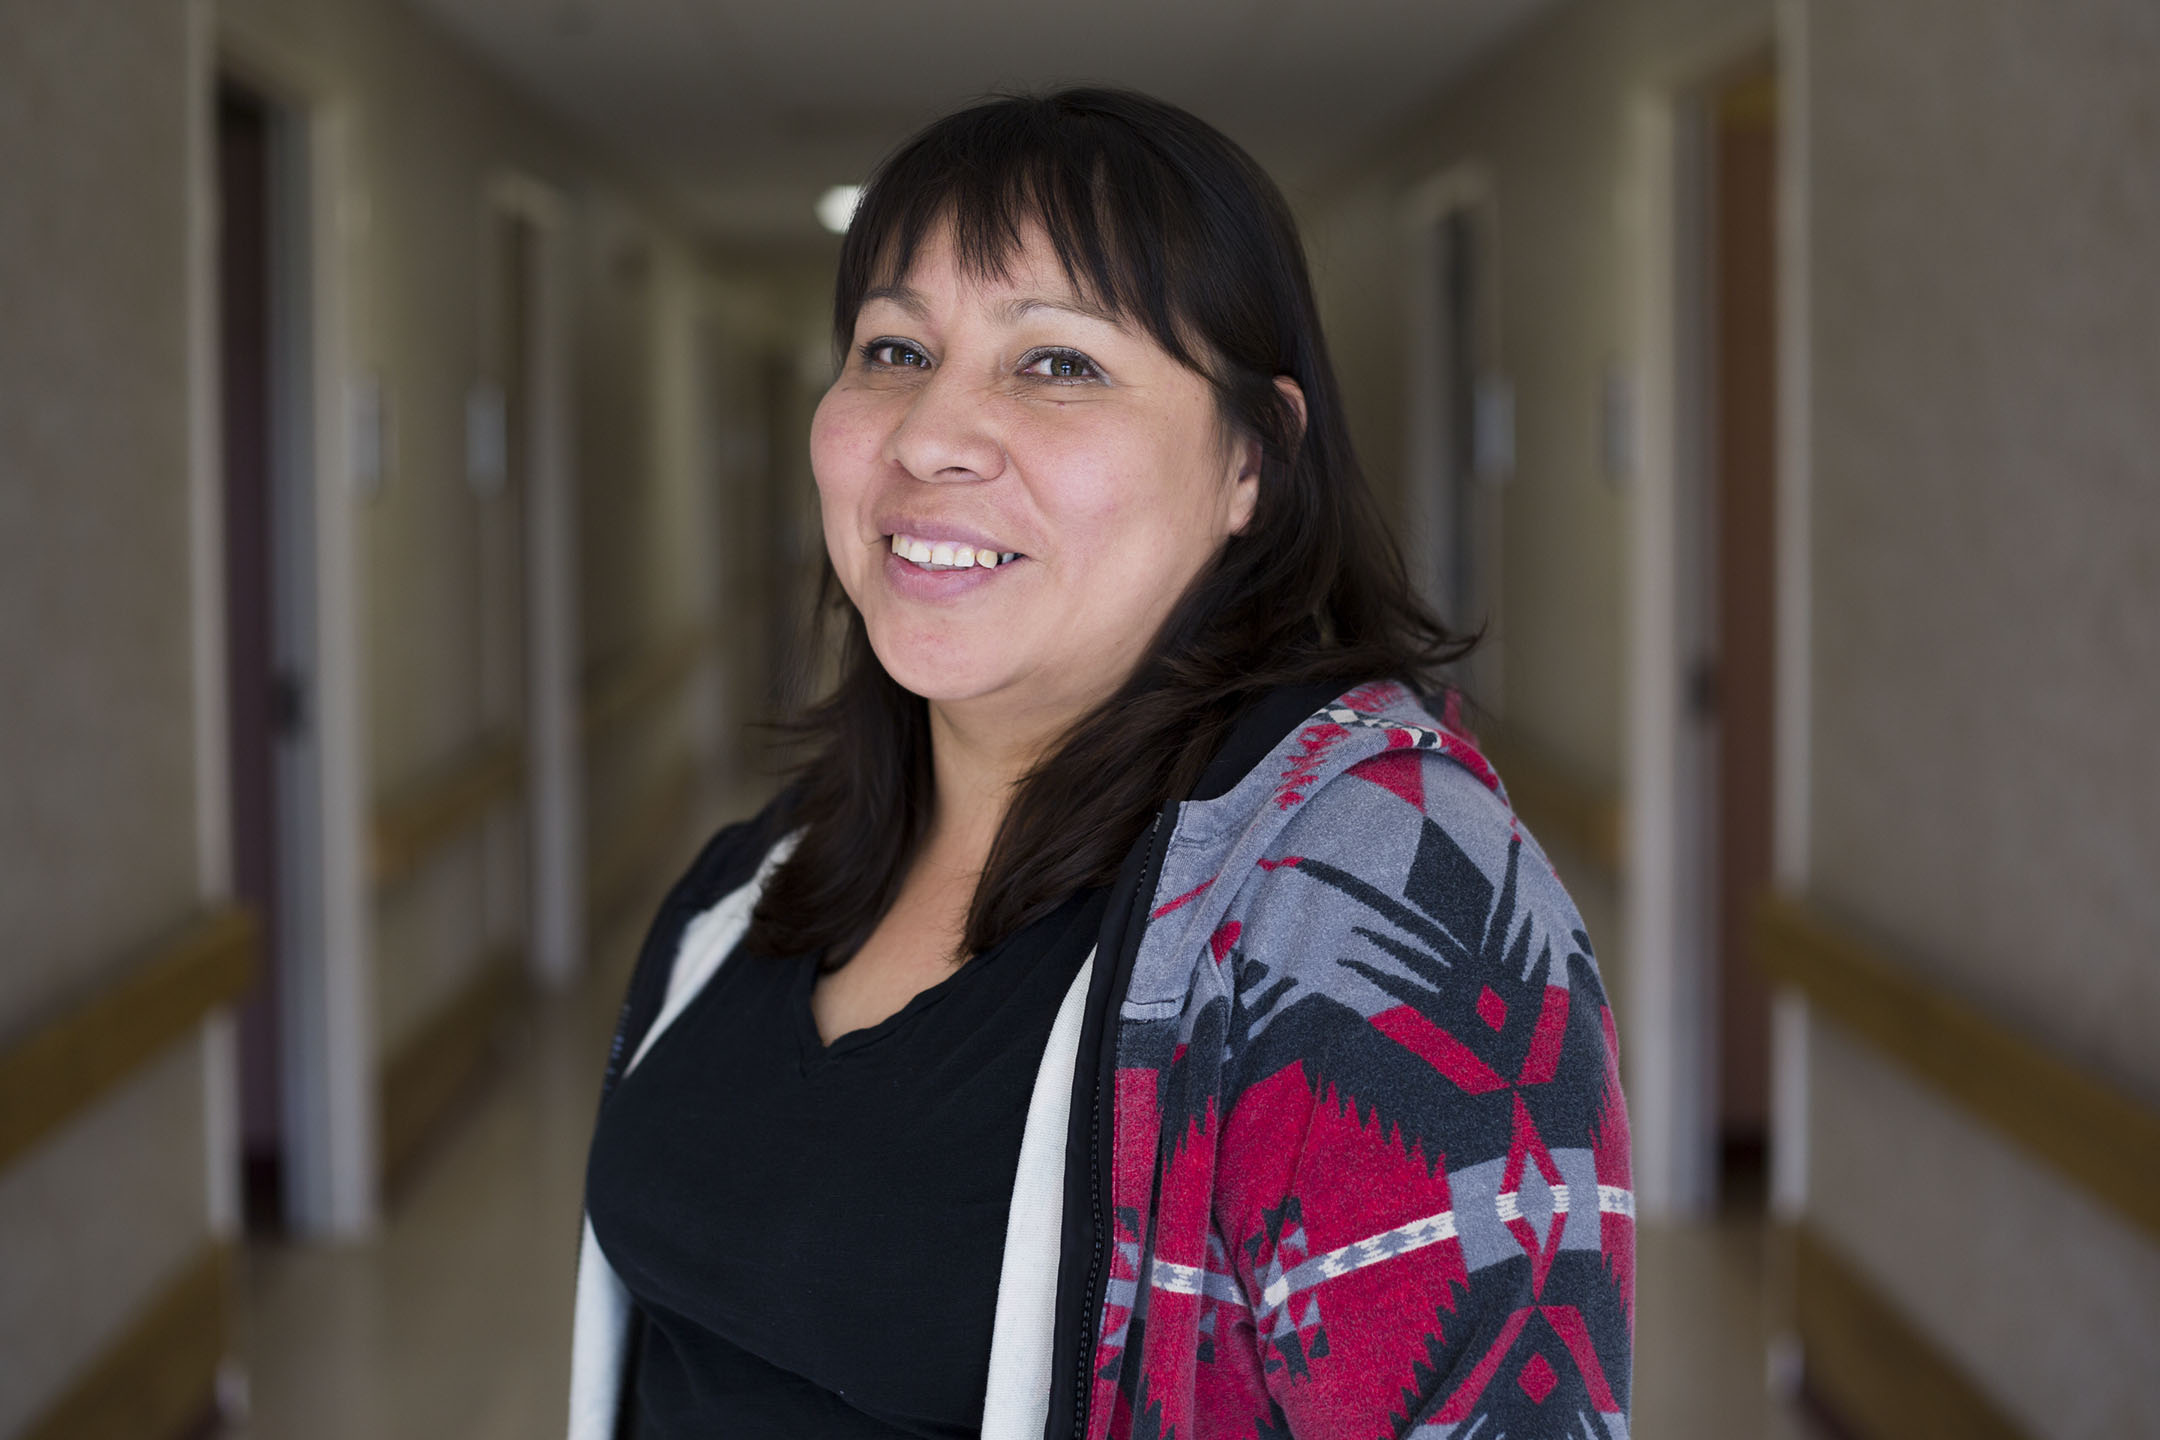 Carla Catolster, the Awe Kualawaache care center administrator, has spent the last three years making a handful of changes to the center. “No one wants to be here in a nursing home,” said Catolster. “But if they’re going to be here, I hope they enjoy it.”